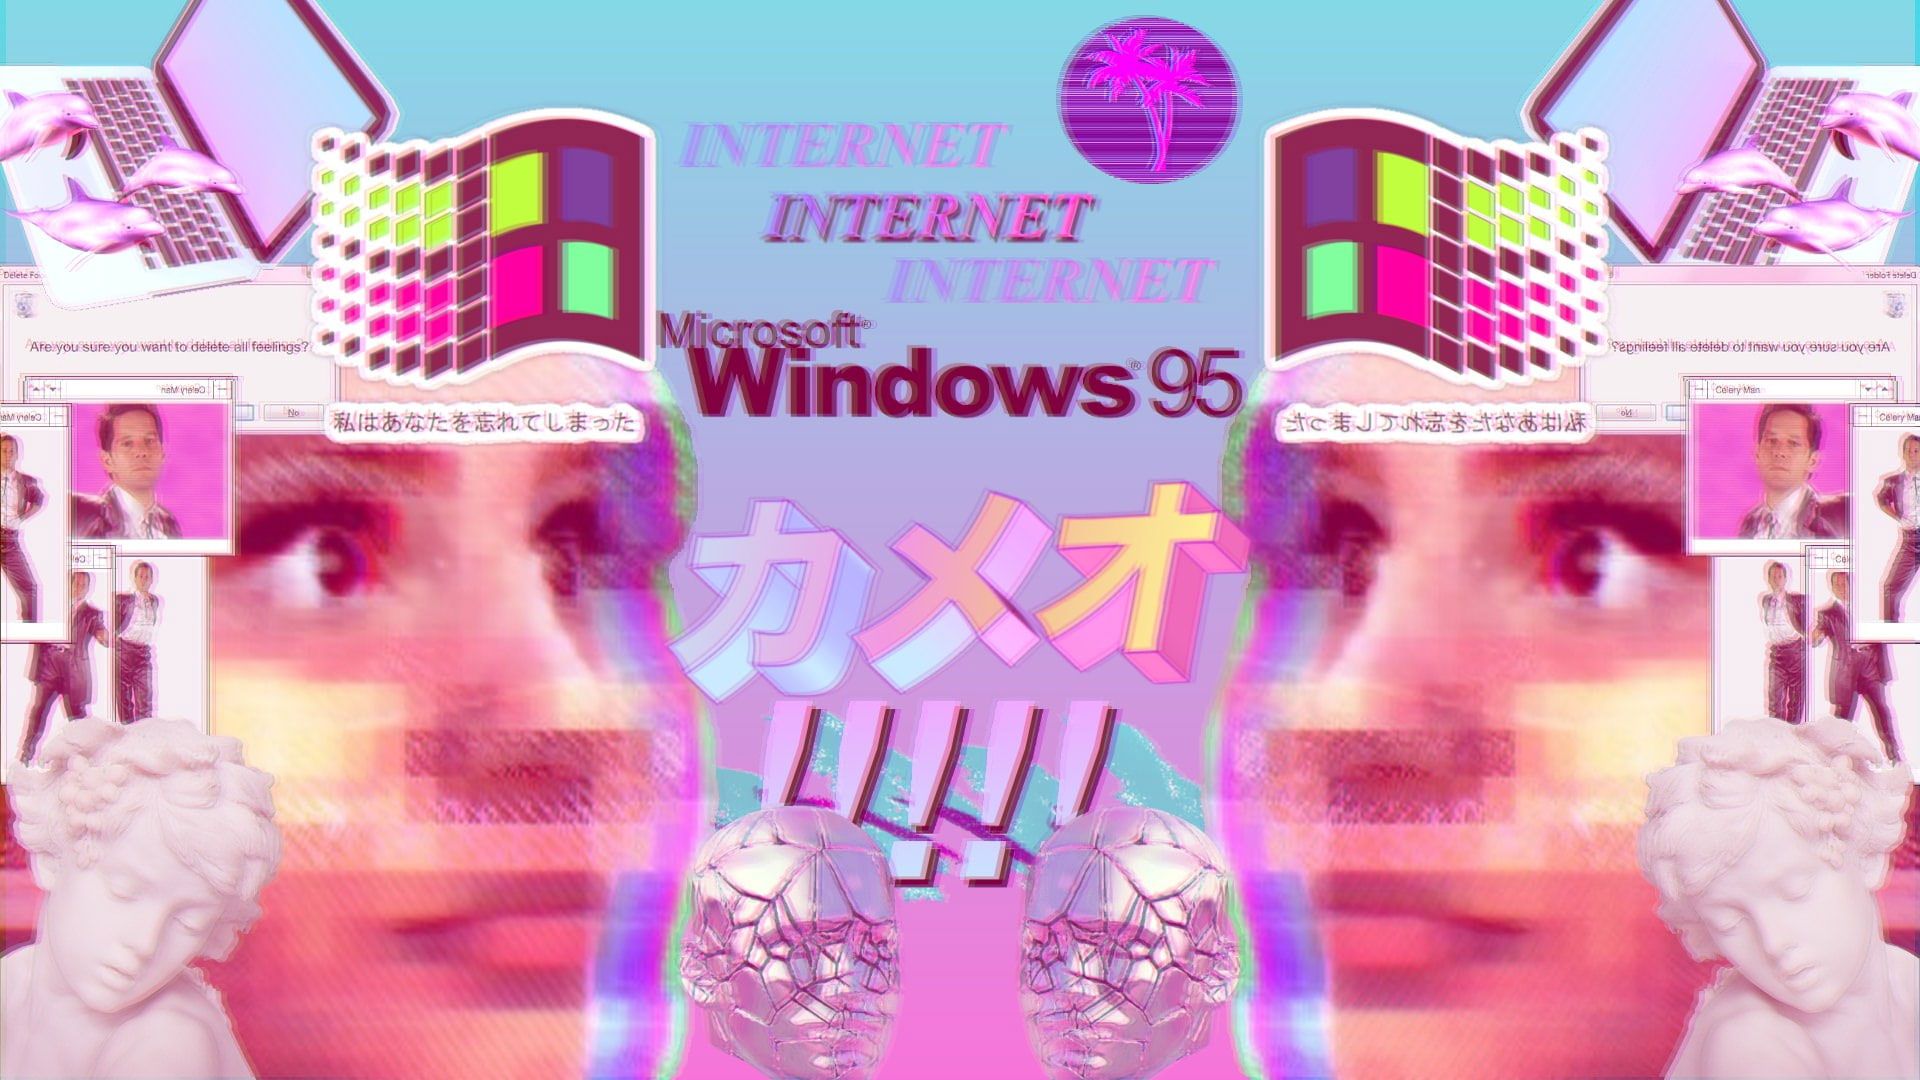 Aesthetic Vaporwave Wallpaper With Japanese Writing That Reads - Windows 95